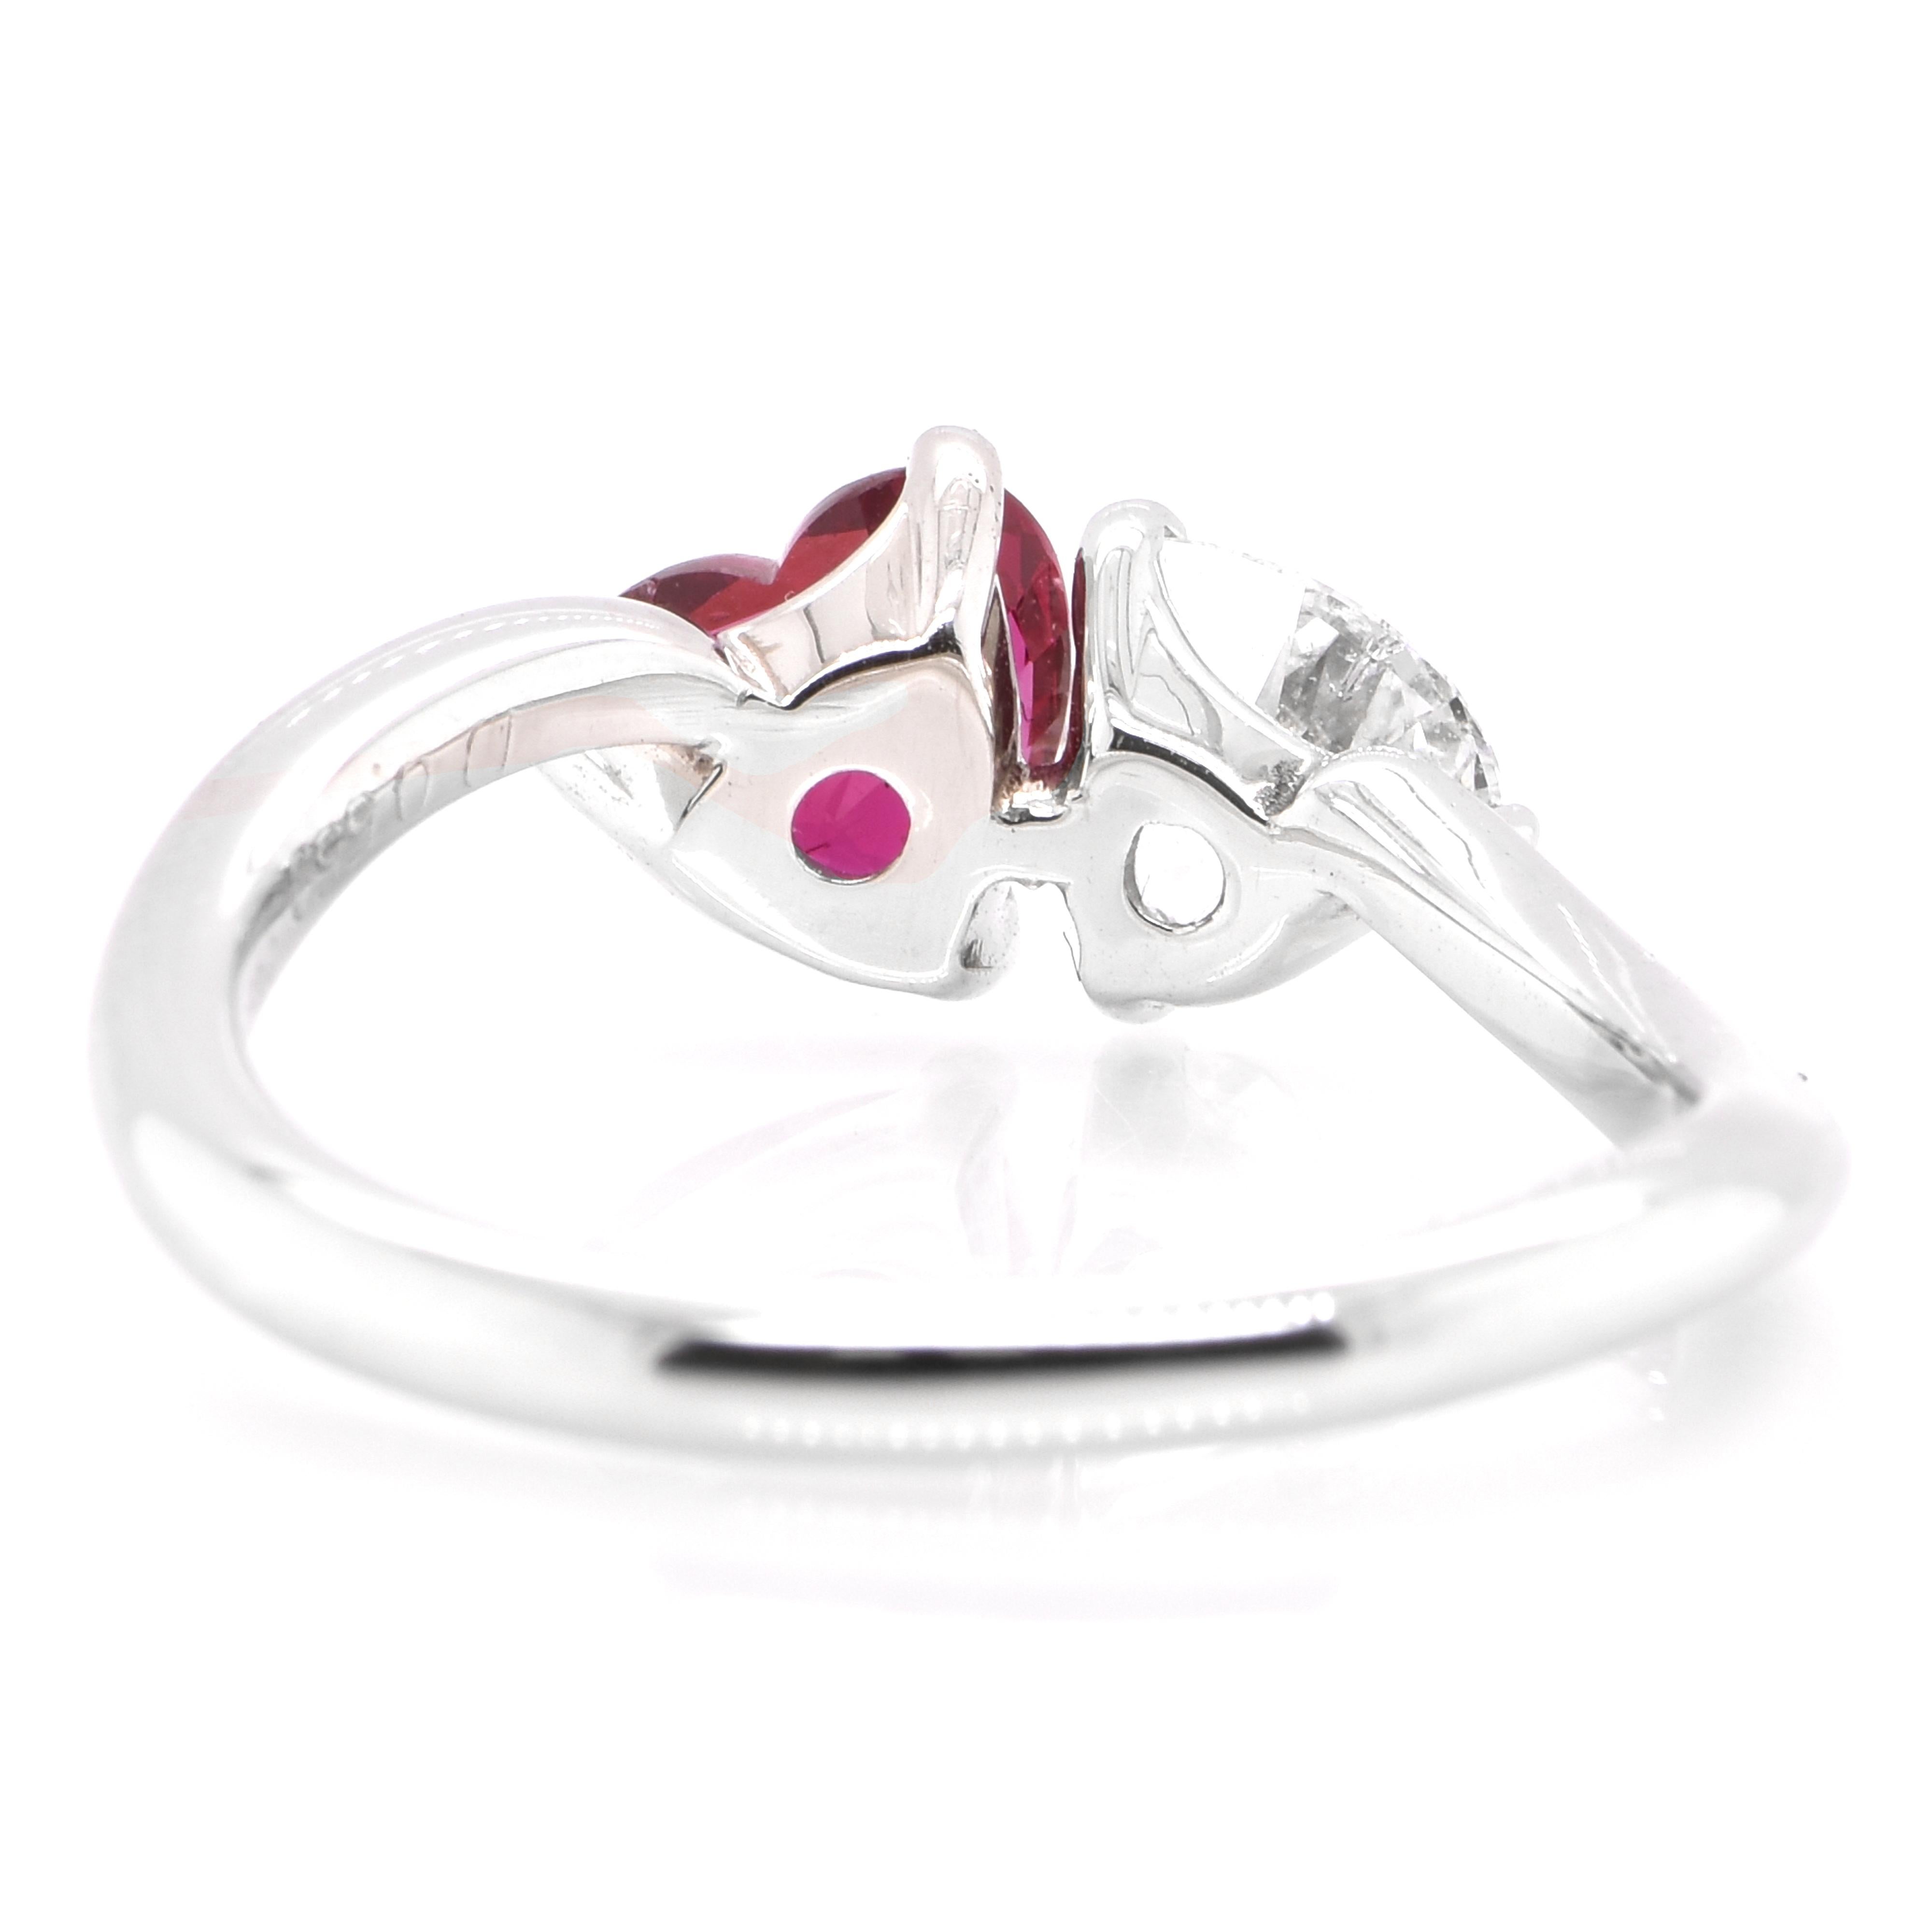 Women's 1.05 Carat Natural Heart-Cut Ruby and Diamond Ring set in Platinum